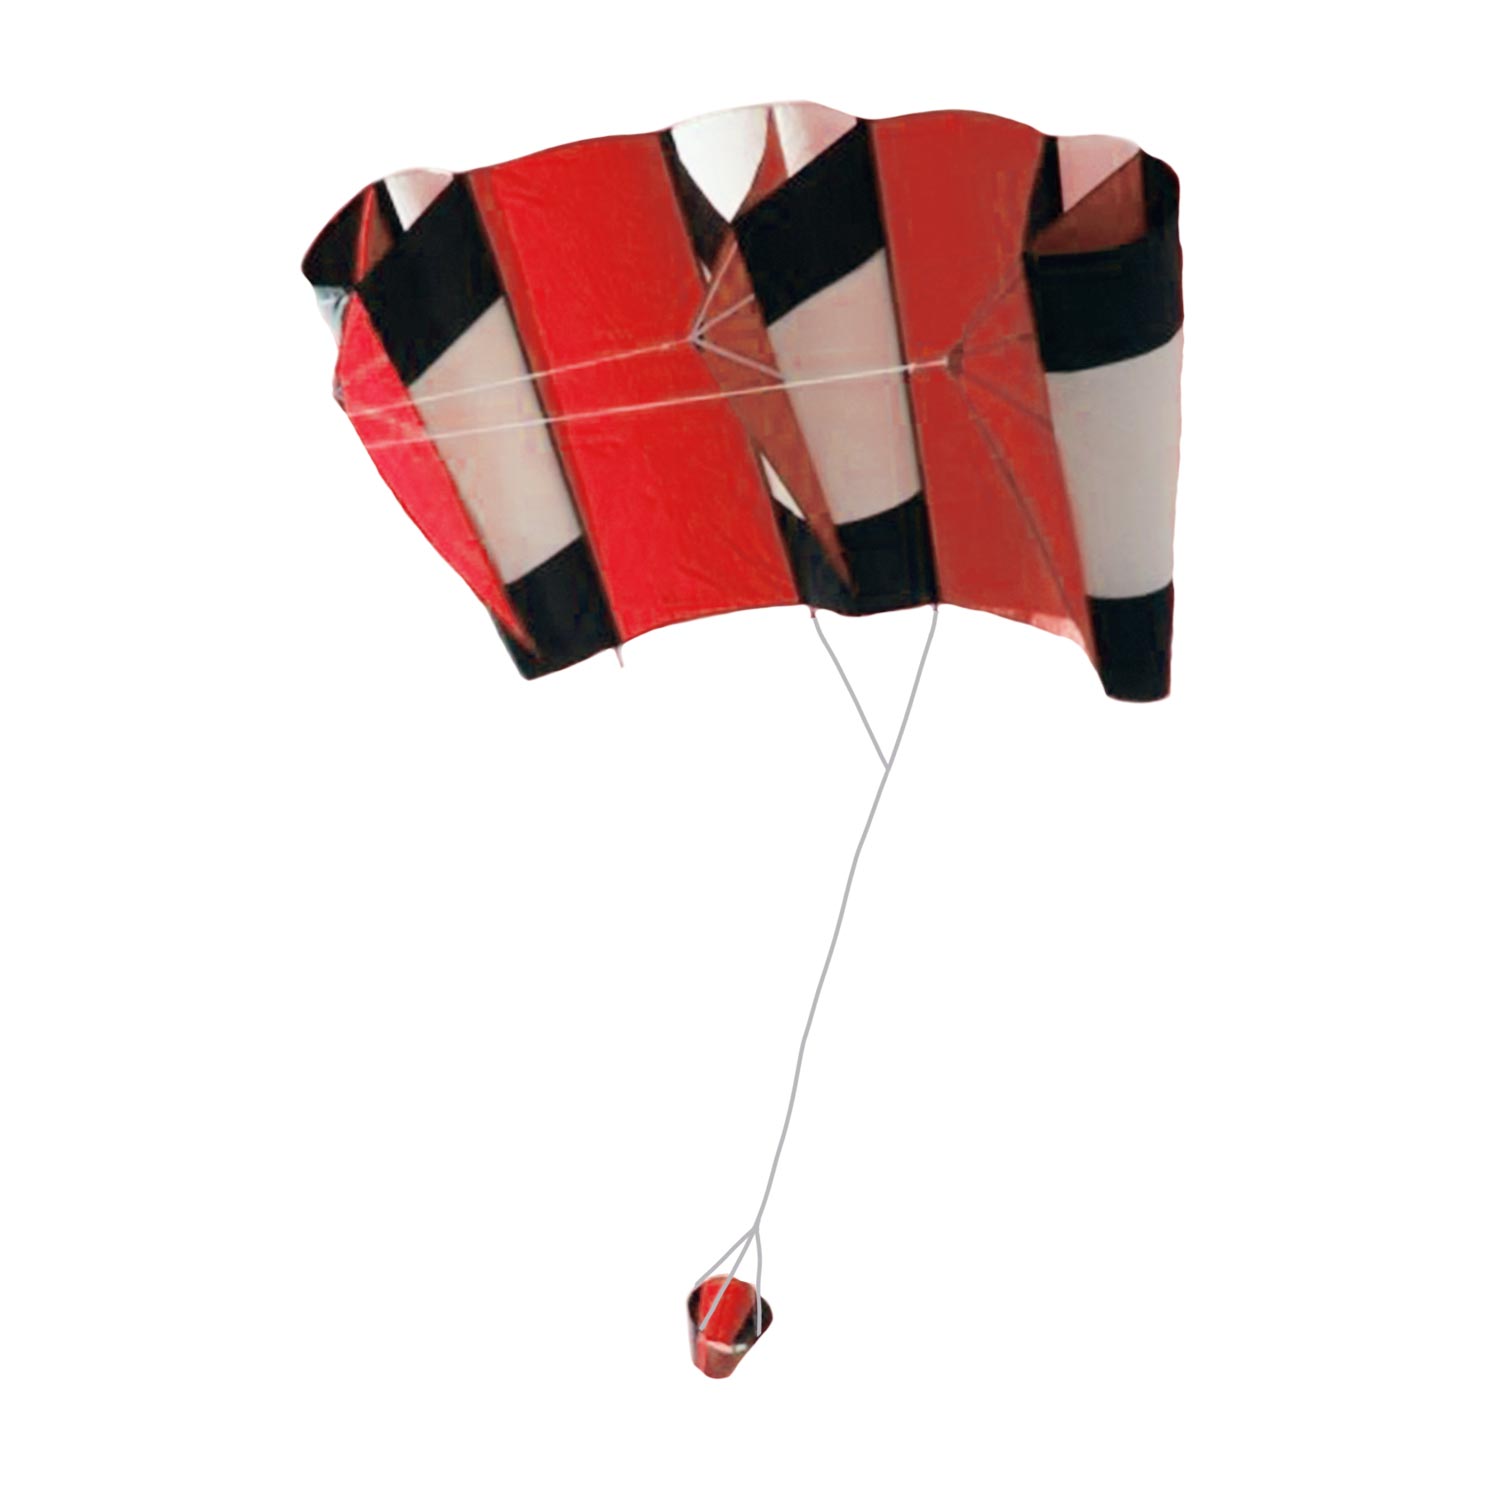 Parasled 3.9 (KITE ONLY)